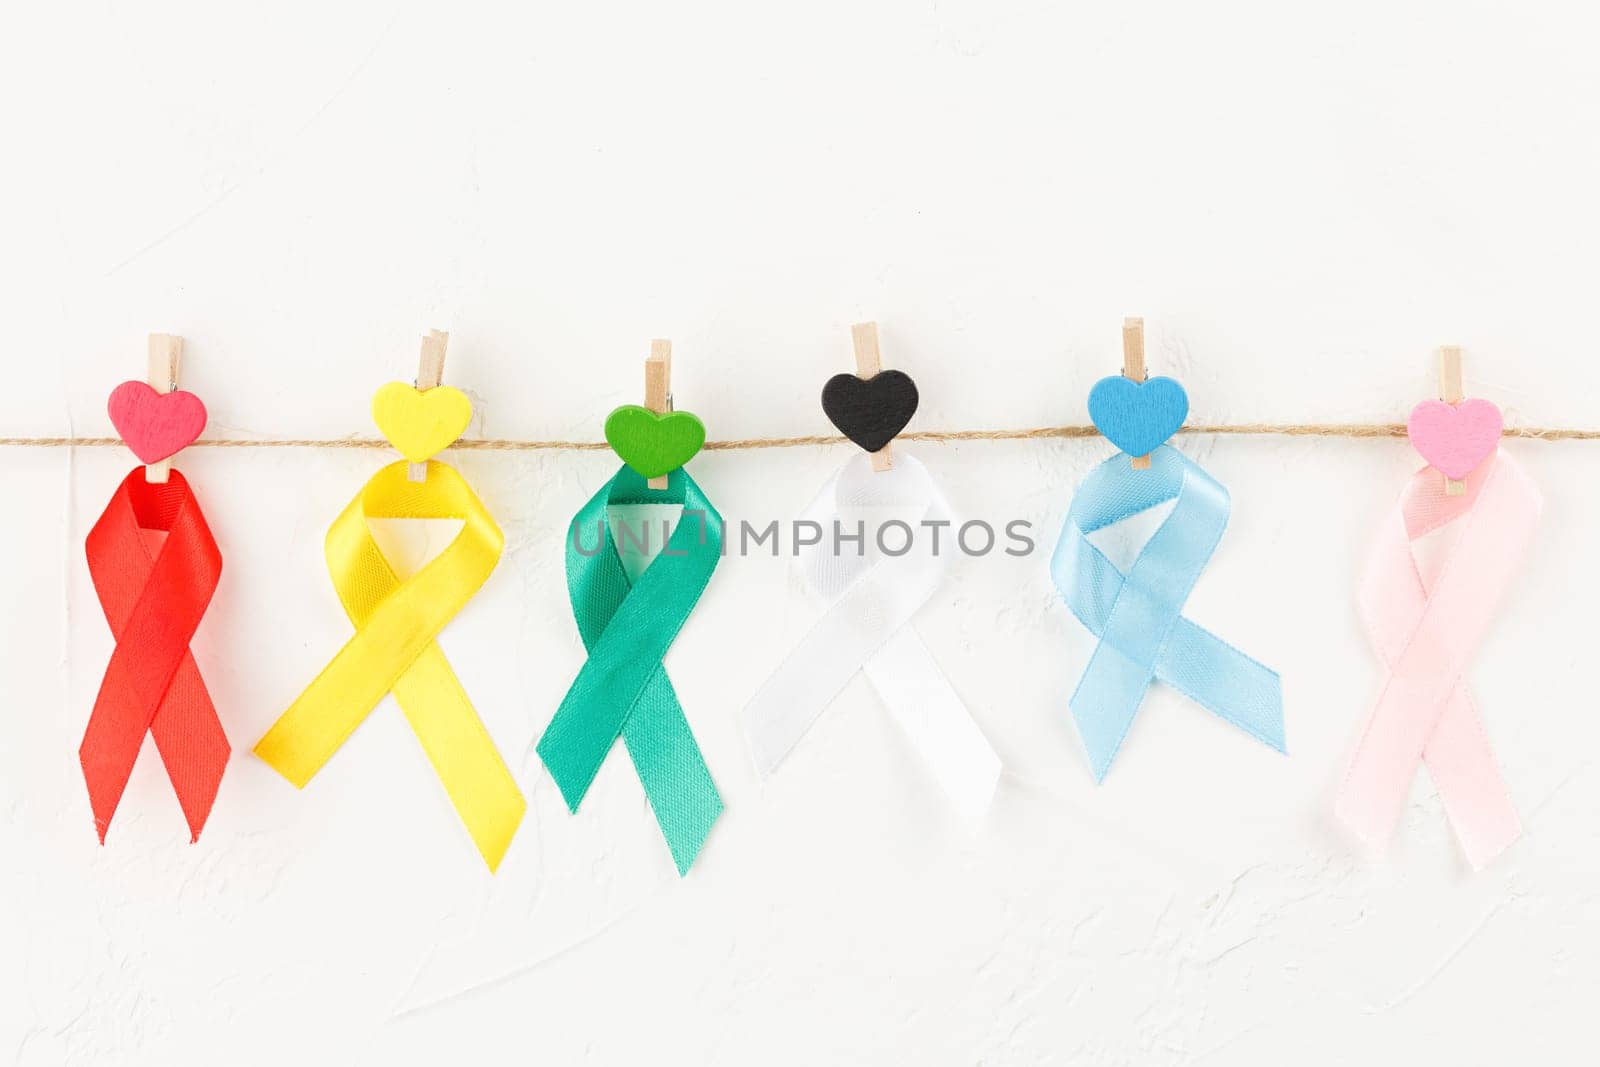 Colored ribbons on a rope with wooden clothespins with multicolored hearts against white background. Top view. Health care. AIDS prevention concept. Hiv and cancer awareness. Flat lay.